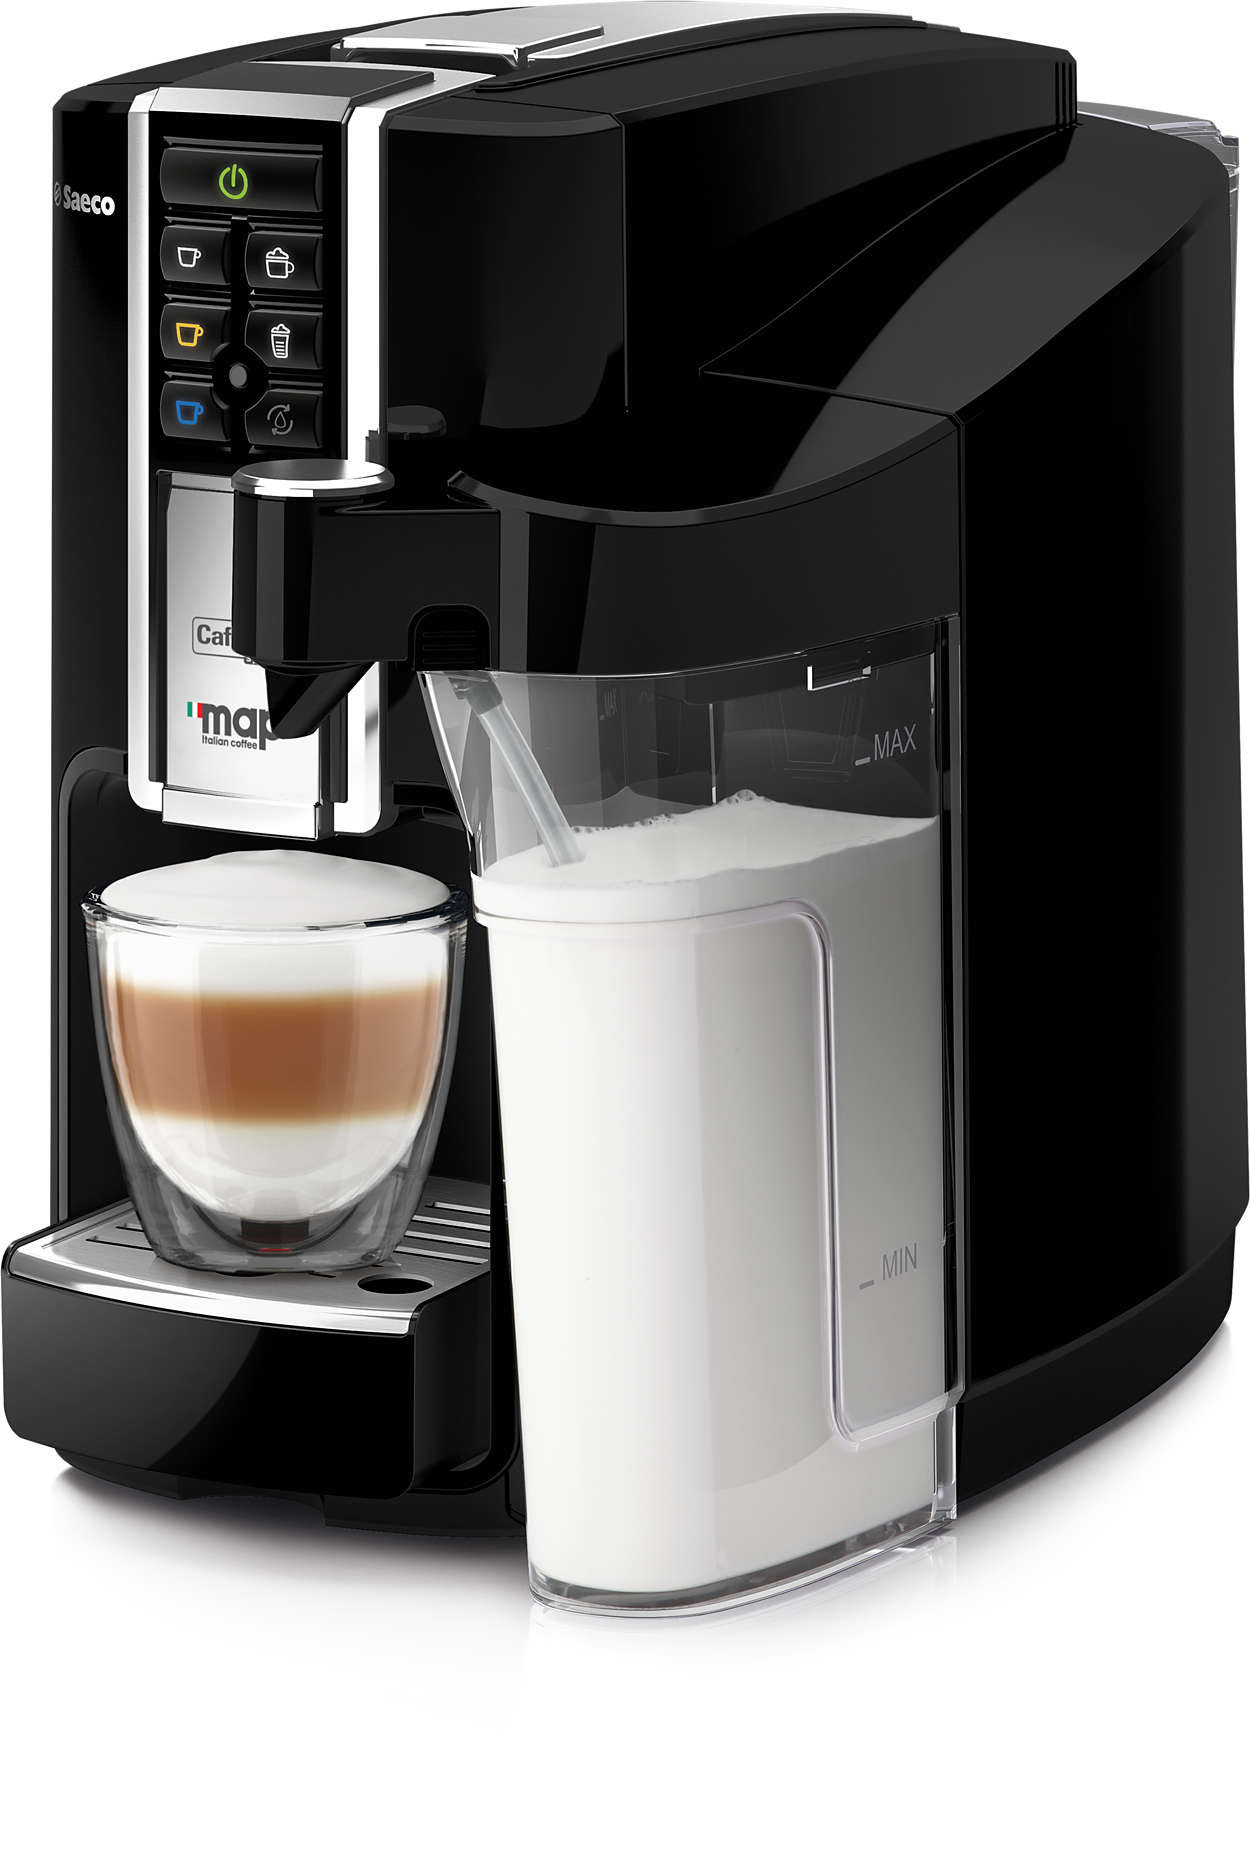 The full automatic of coffee capsule machines